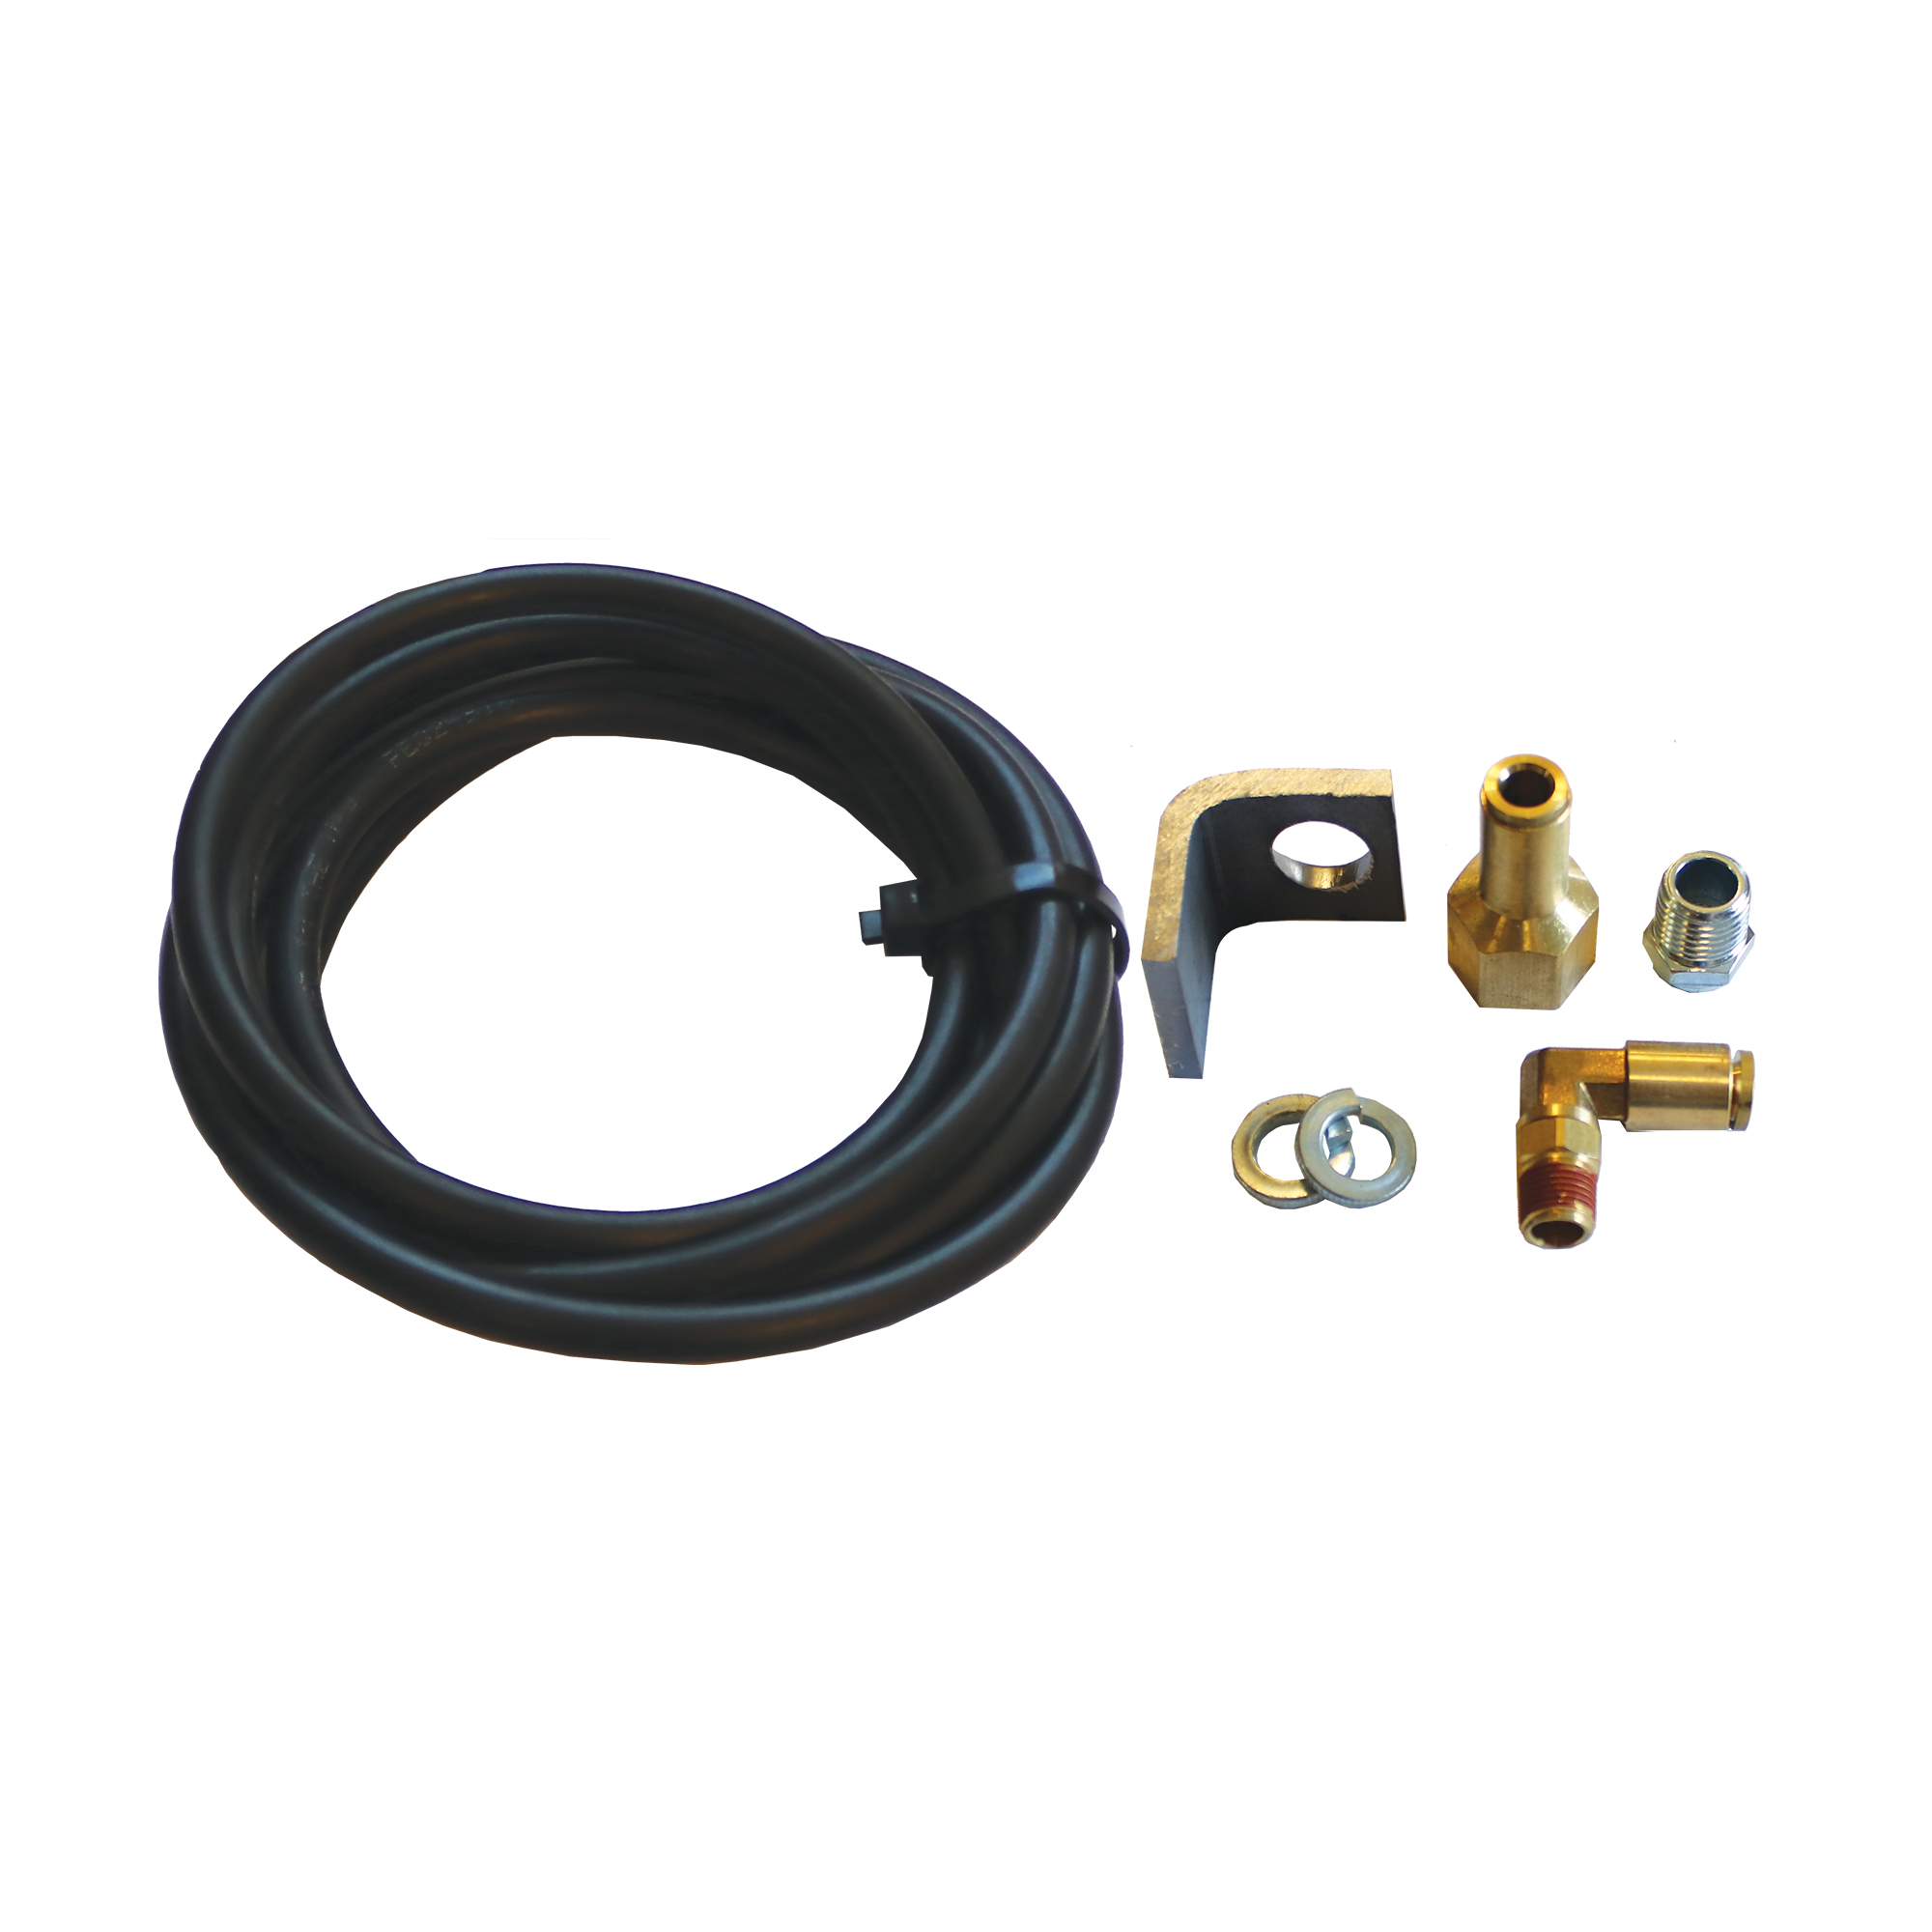 Breather Vent Assembly for Oil Tank - Seal-Rite Products LLC